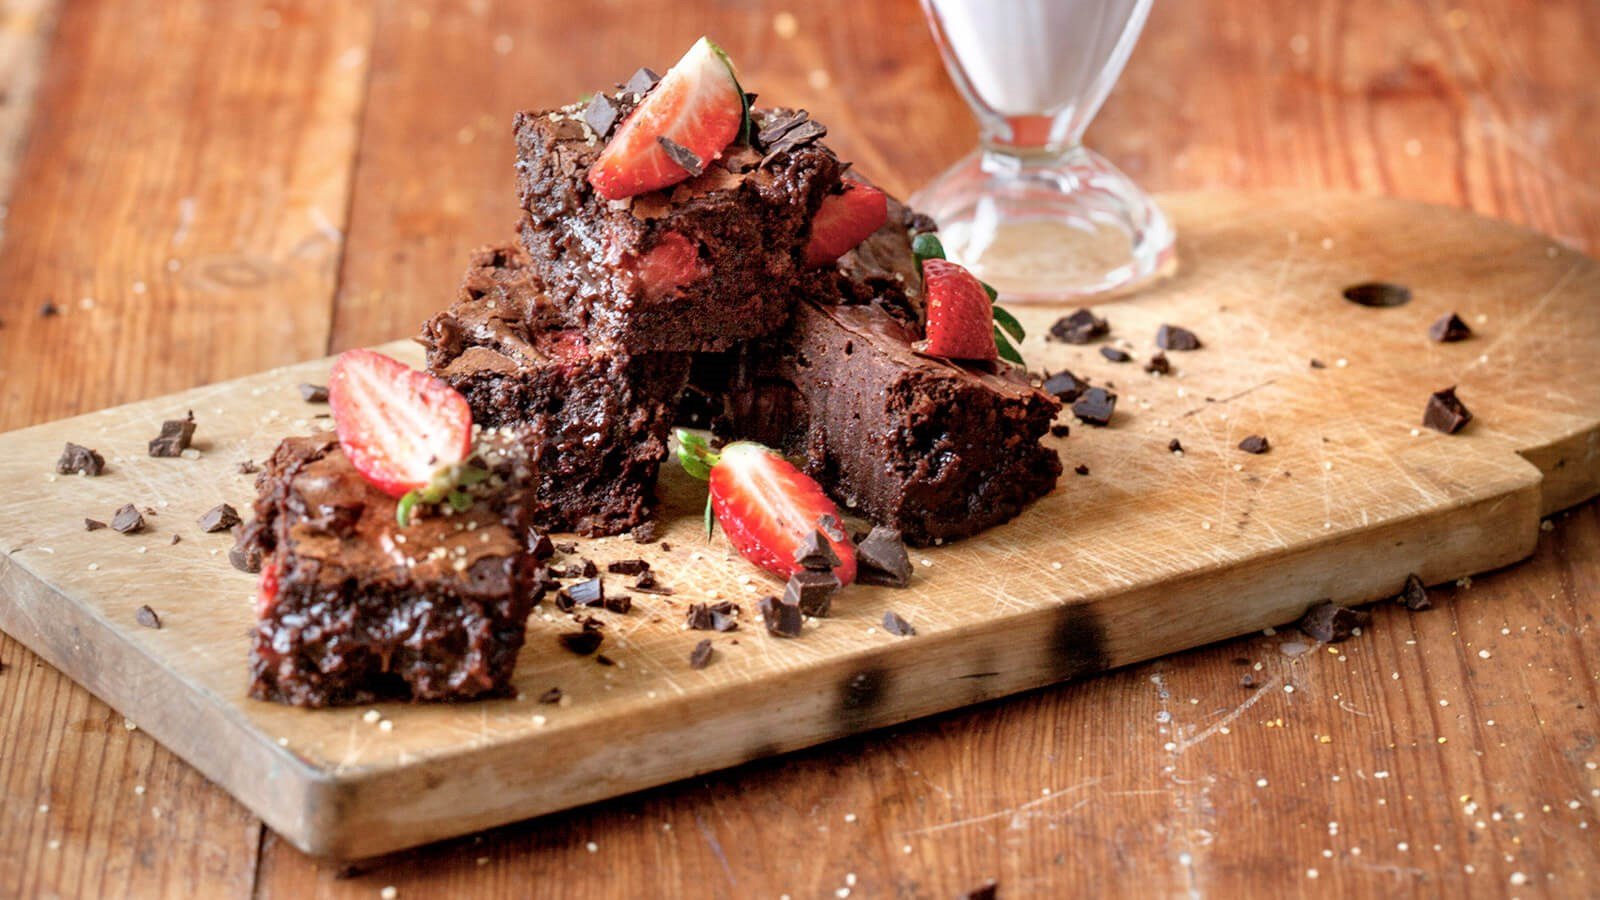 Chocolate brownies with straberries on a wooden board